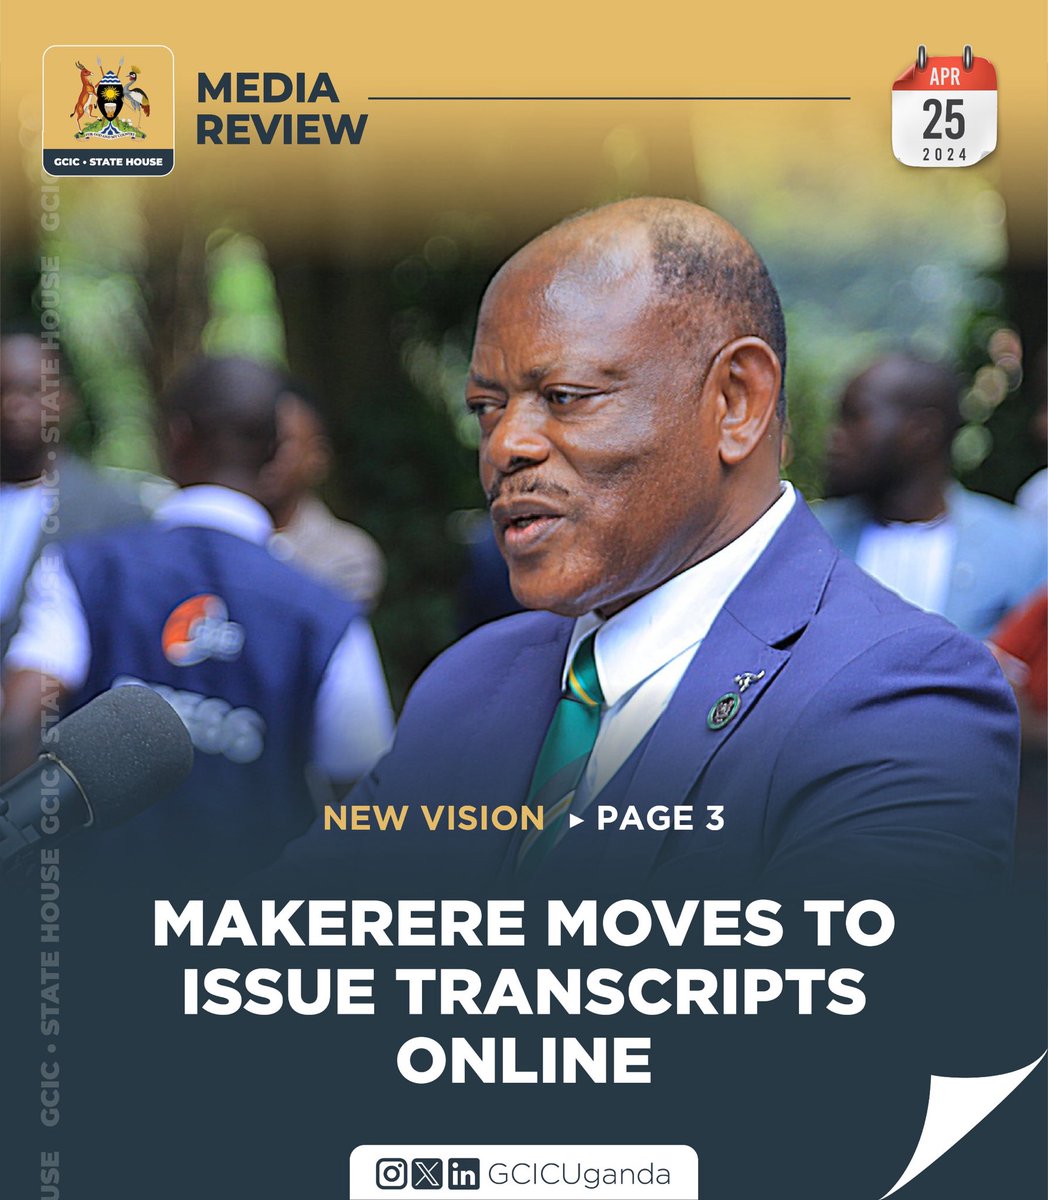 .@Makerere moves to issue transcripts online. This will enhance accessibility. #GCICMediaReview #OpenGovUg